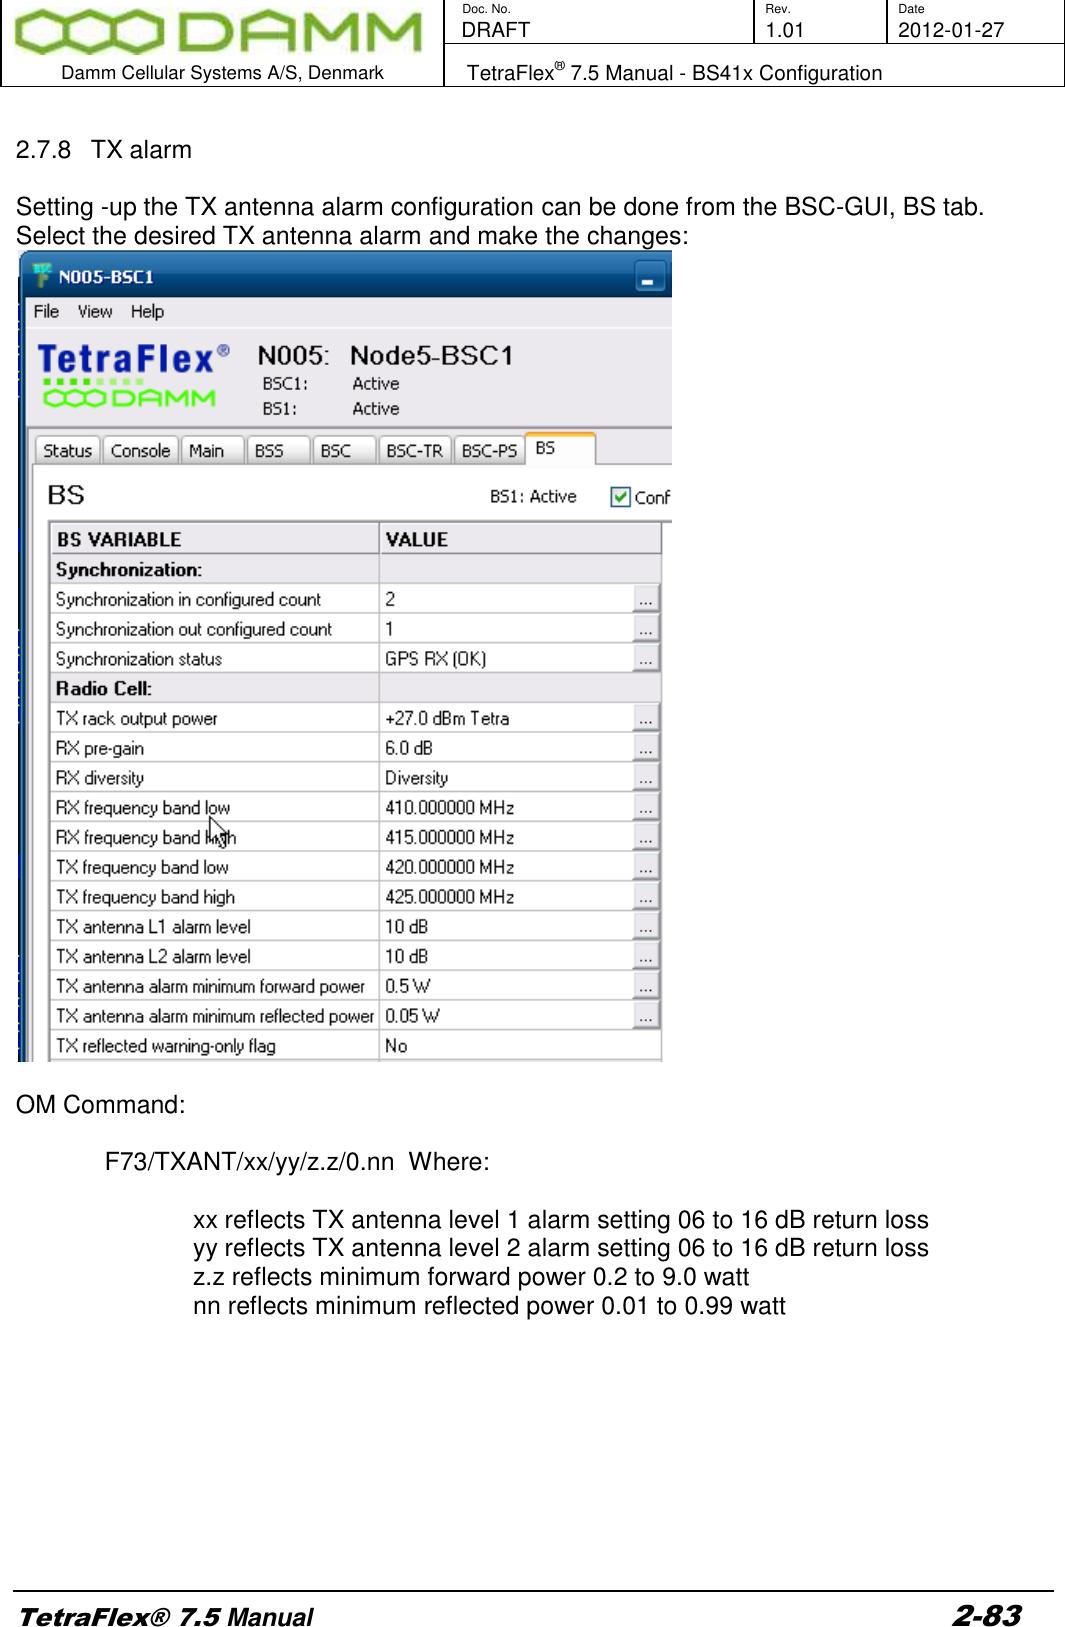        Doc. No. Rev. Date    DRAFT  1.01 2012-01-27  Damm Cellular Systems A/S, Denmark   TetraFlex® 7.5 Manual - BS41x Configuration  TetraFlex® 7.5 Manual 2-83  2.7.8  TX alarm  Setting -up the TX antenna alarm configuration can be done from the BSC-GUI, BS tab. Select the desired TX antenna alarm and make the changes:   OM Command:      F73/TXANT/xx/yy/z.z/0.nn  Where:   xx reflects TX antenna level 1 alarm setting 06 to 16 dB return loss yy reflects TX antenna level 2 alarm setting 06 to 16 dB return loss z.z reflects minimum forward power 0.2 to 9.0 watt nn reflects minimum reflected power 0.01 to 0.99 watt          